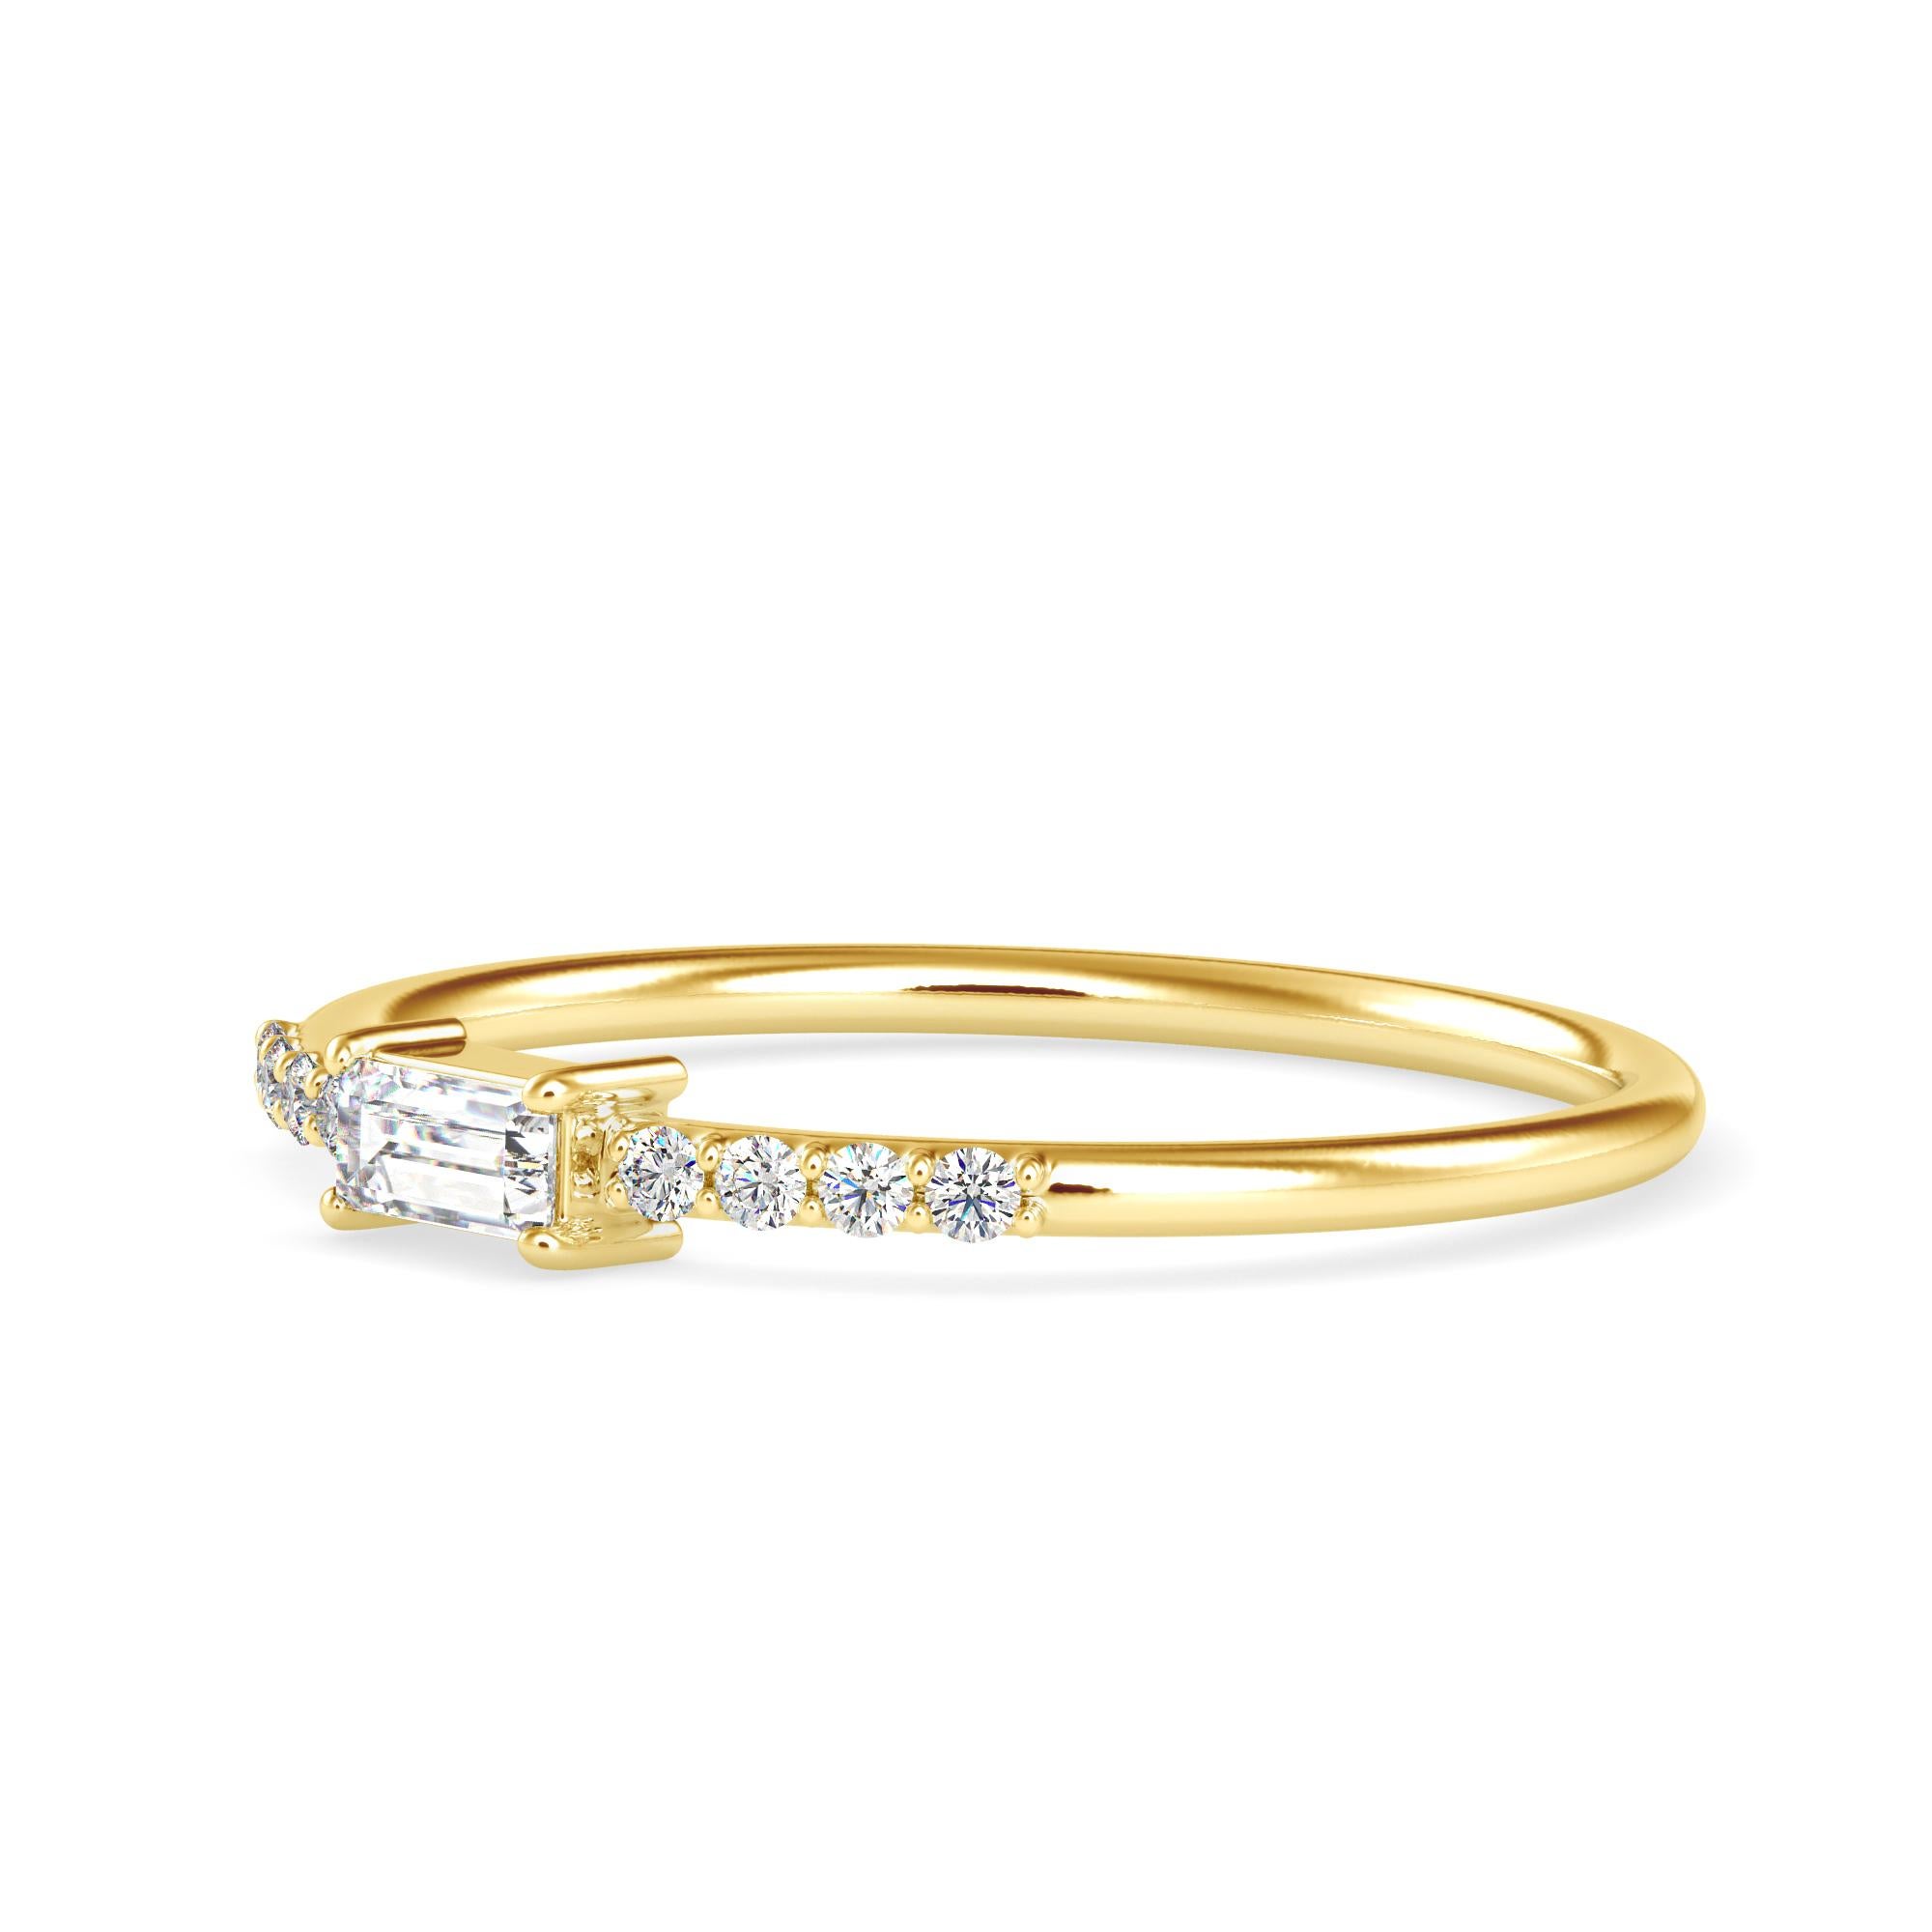 0.16 Carat Diamond 14K Yellow Gold Ring
Stamped: 14K 
Total Ring Weight: 1.2 Grams
Center Diamond Weight: 0.11 Carat (F-G Color, VS2-SI1 Clarity) 4x2 Millimeters -1
Side Diamonds Weight: 0.05 Carat (F-G Color, VS2-SI1 Clarity ), 1.2 Millimeters